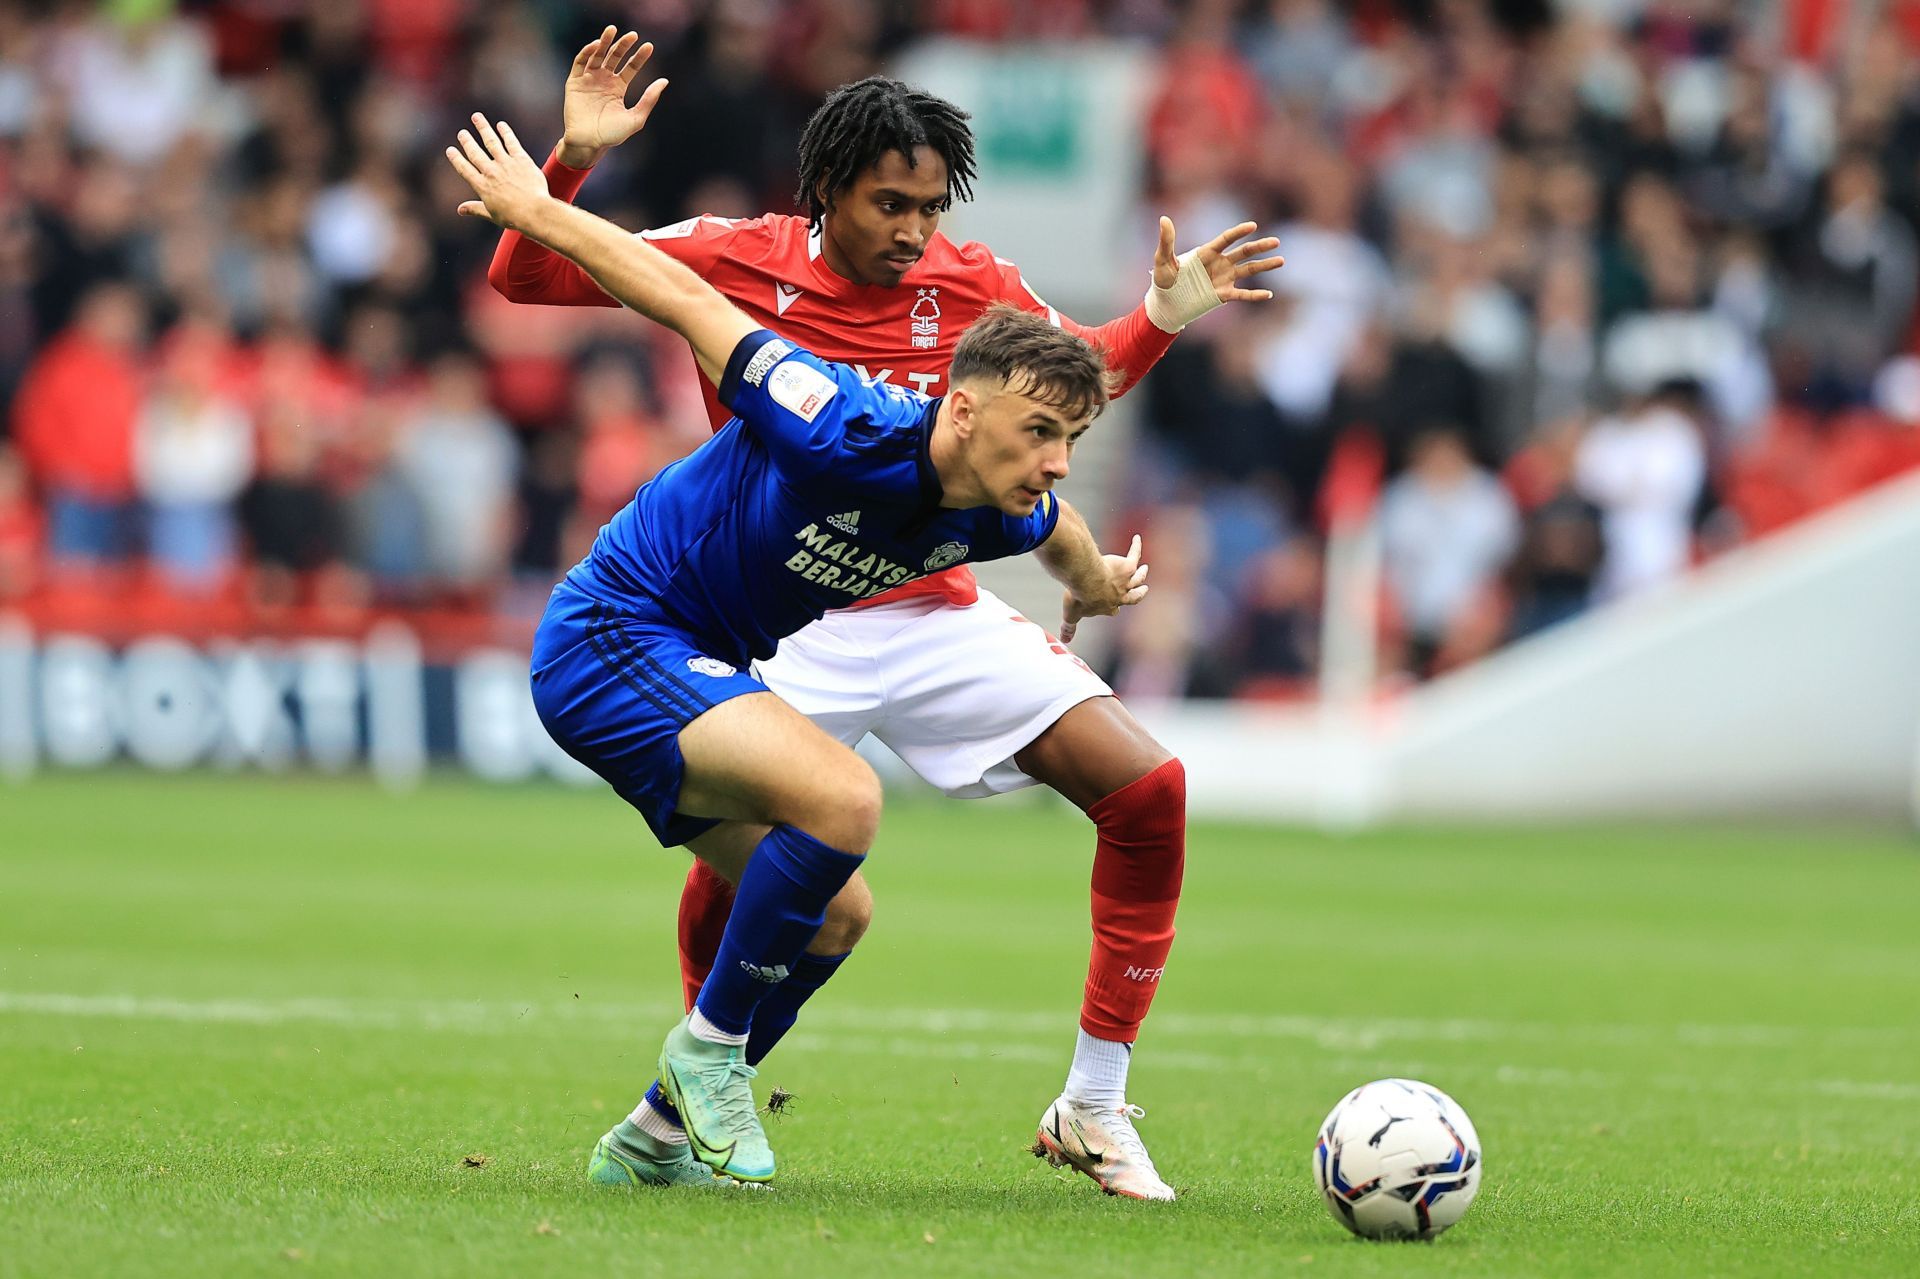 Cardiff City play host to Nottingham Forest on Sunday